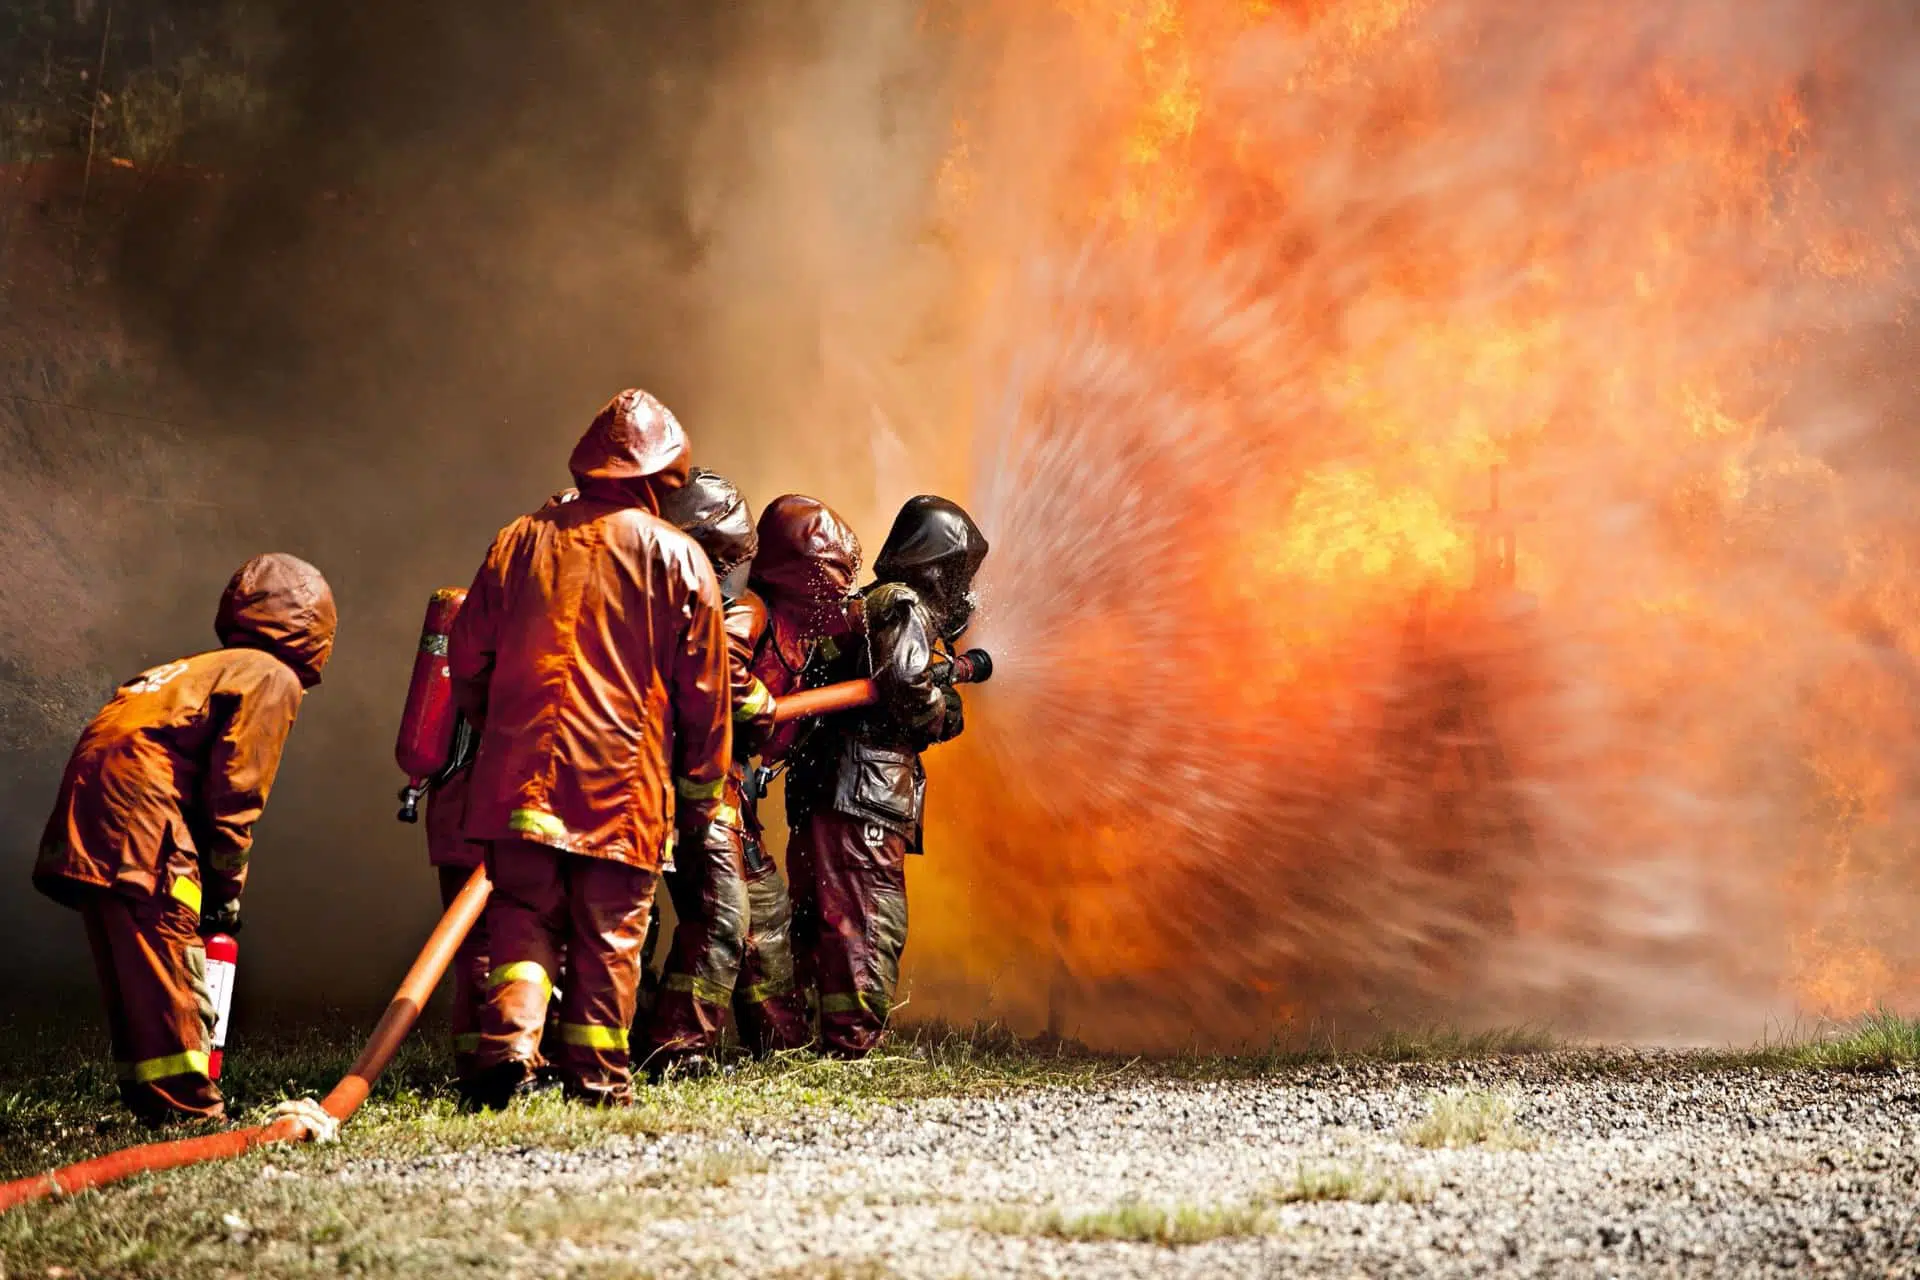 Image of firefighters attempting to extinguish a fire